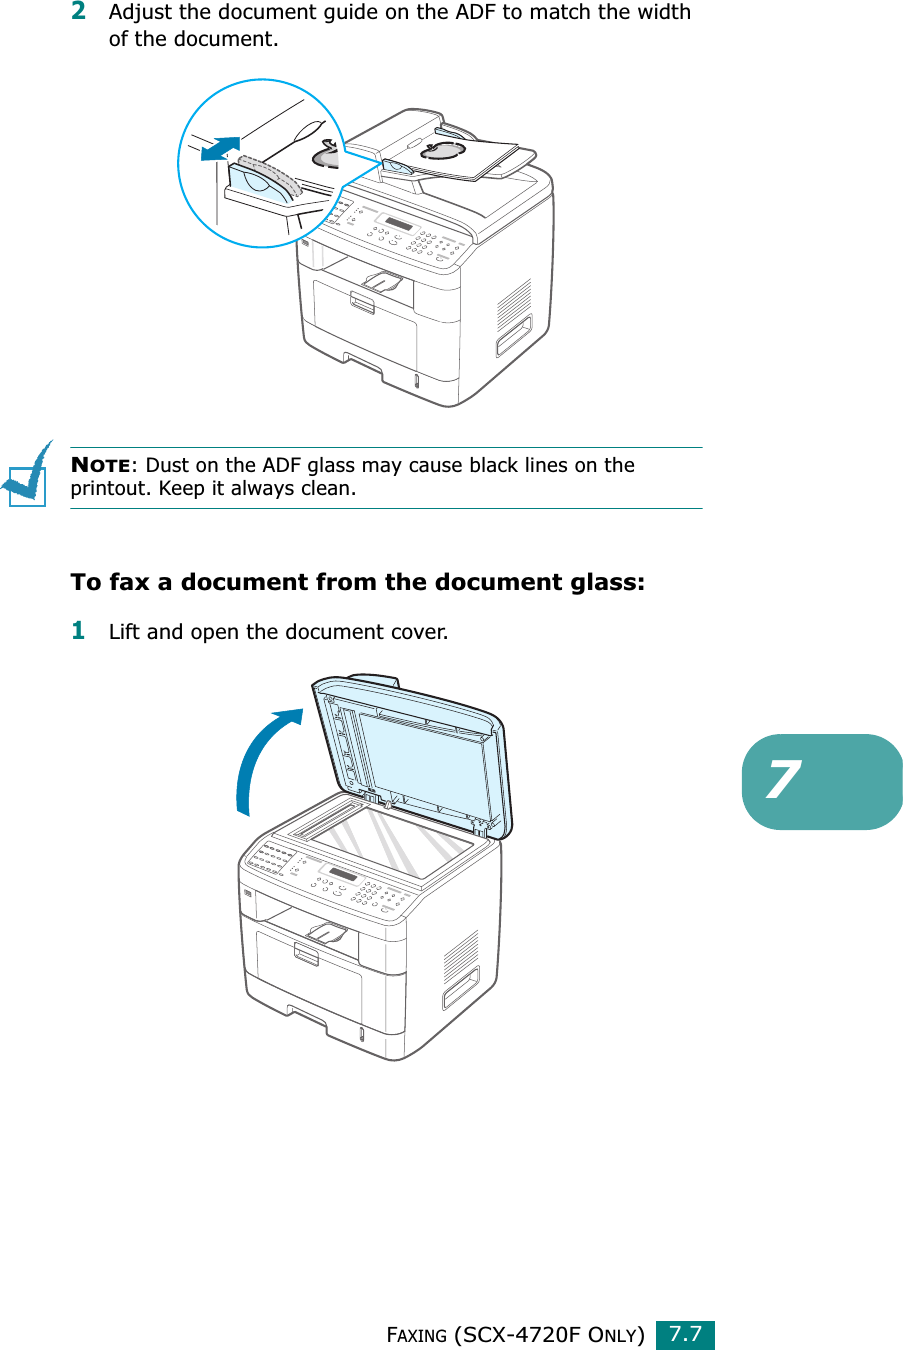 FAXING (SCX-4720F ONLY)7.772Adjust the document guide on the ADF to match the width of the document.NOTE: Dust on the ADF glass may cause black lines on the printout. Keep it always clean.To fax a document from the document glass: 1Lift and open the document cover.